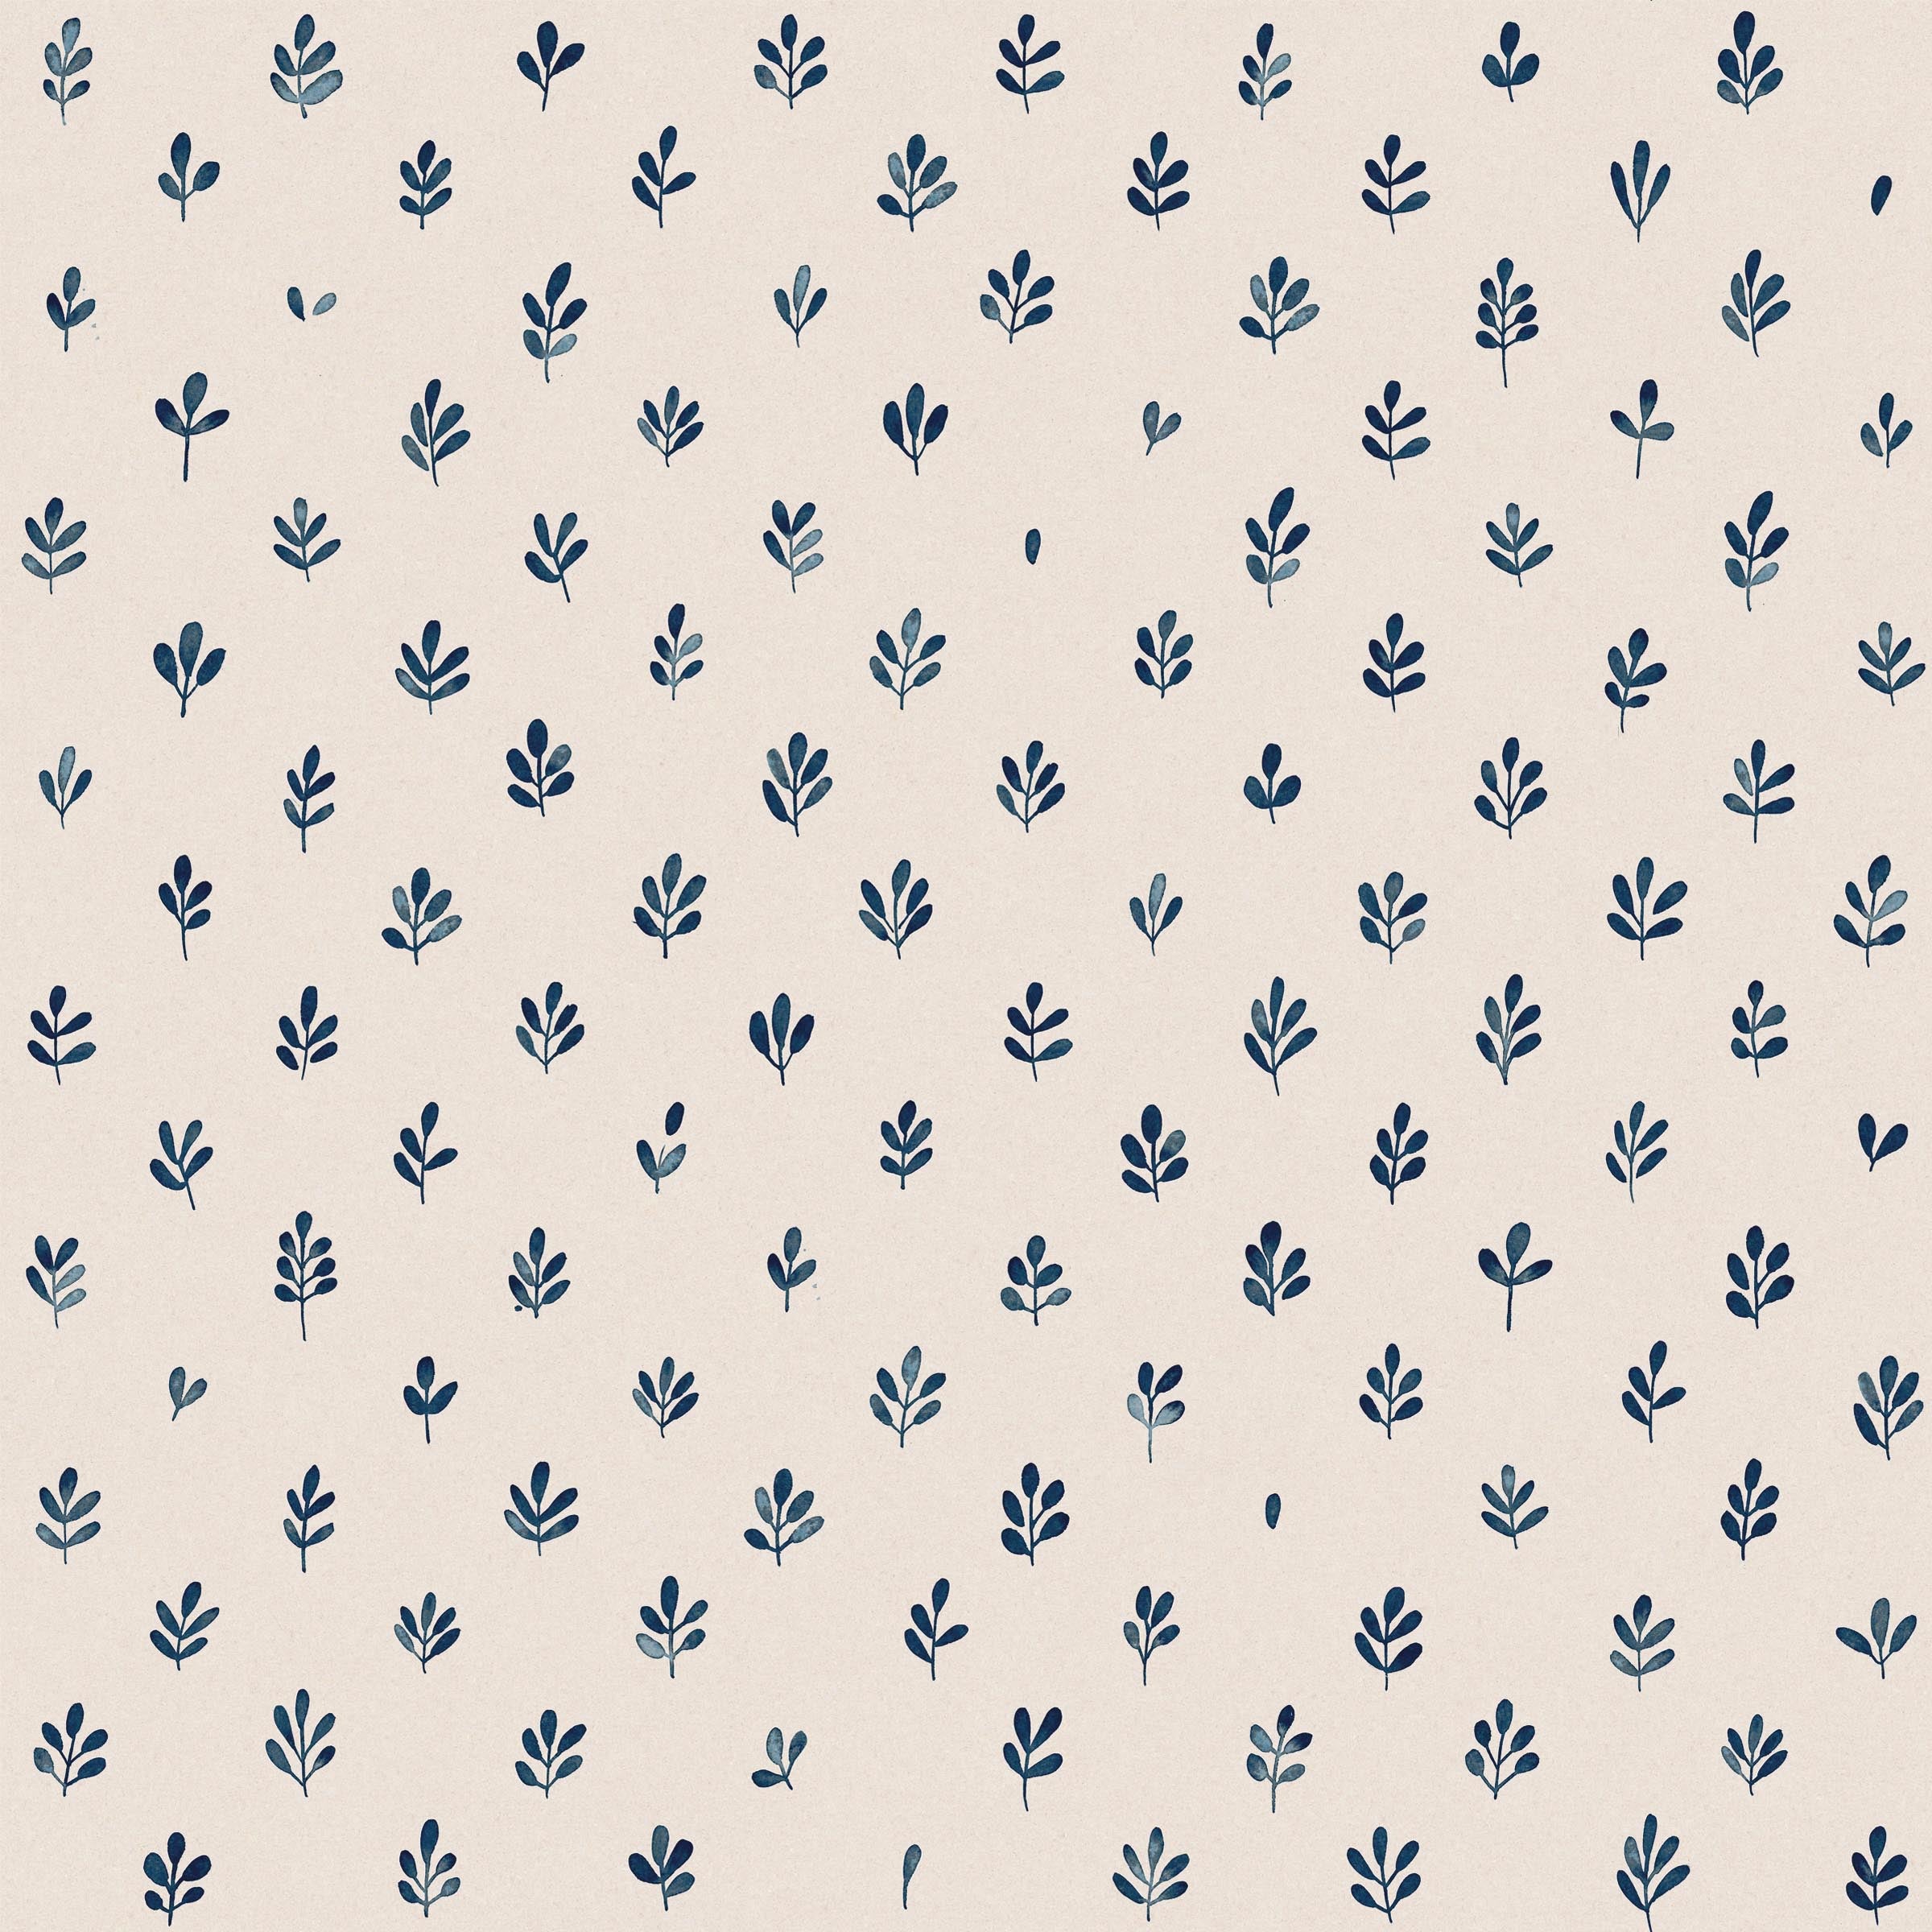 Detail of fabric in a repeating leaf print in navy on a cream field.